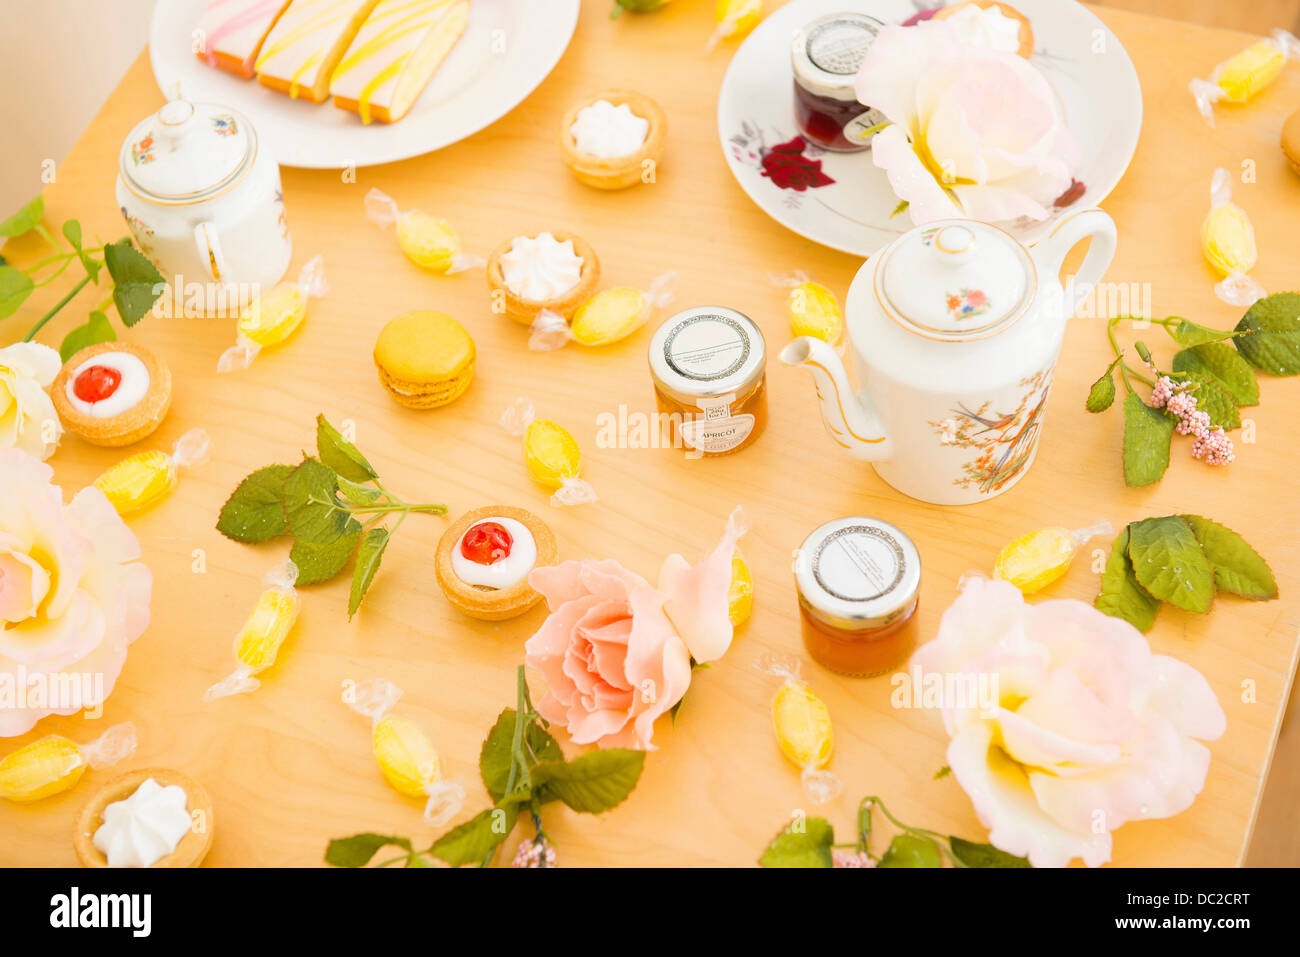 Table with assortment of cakes and confectionery Stock Photo